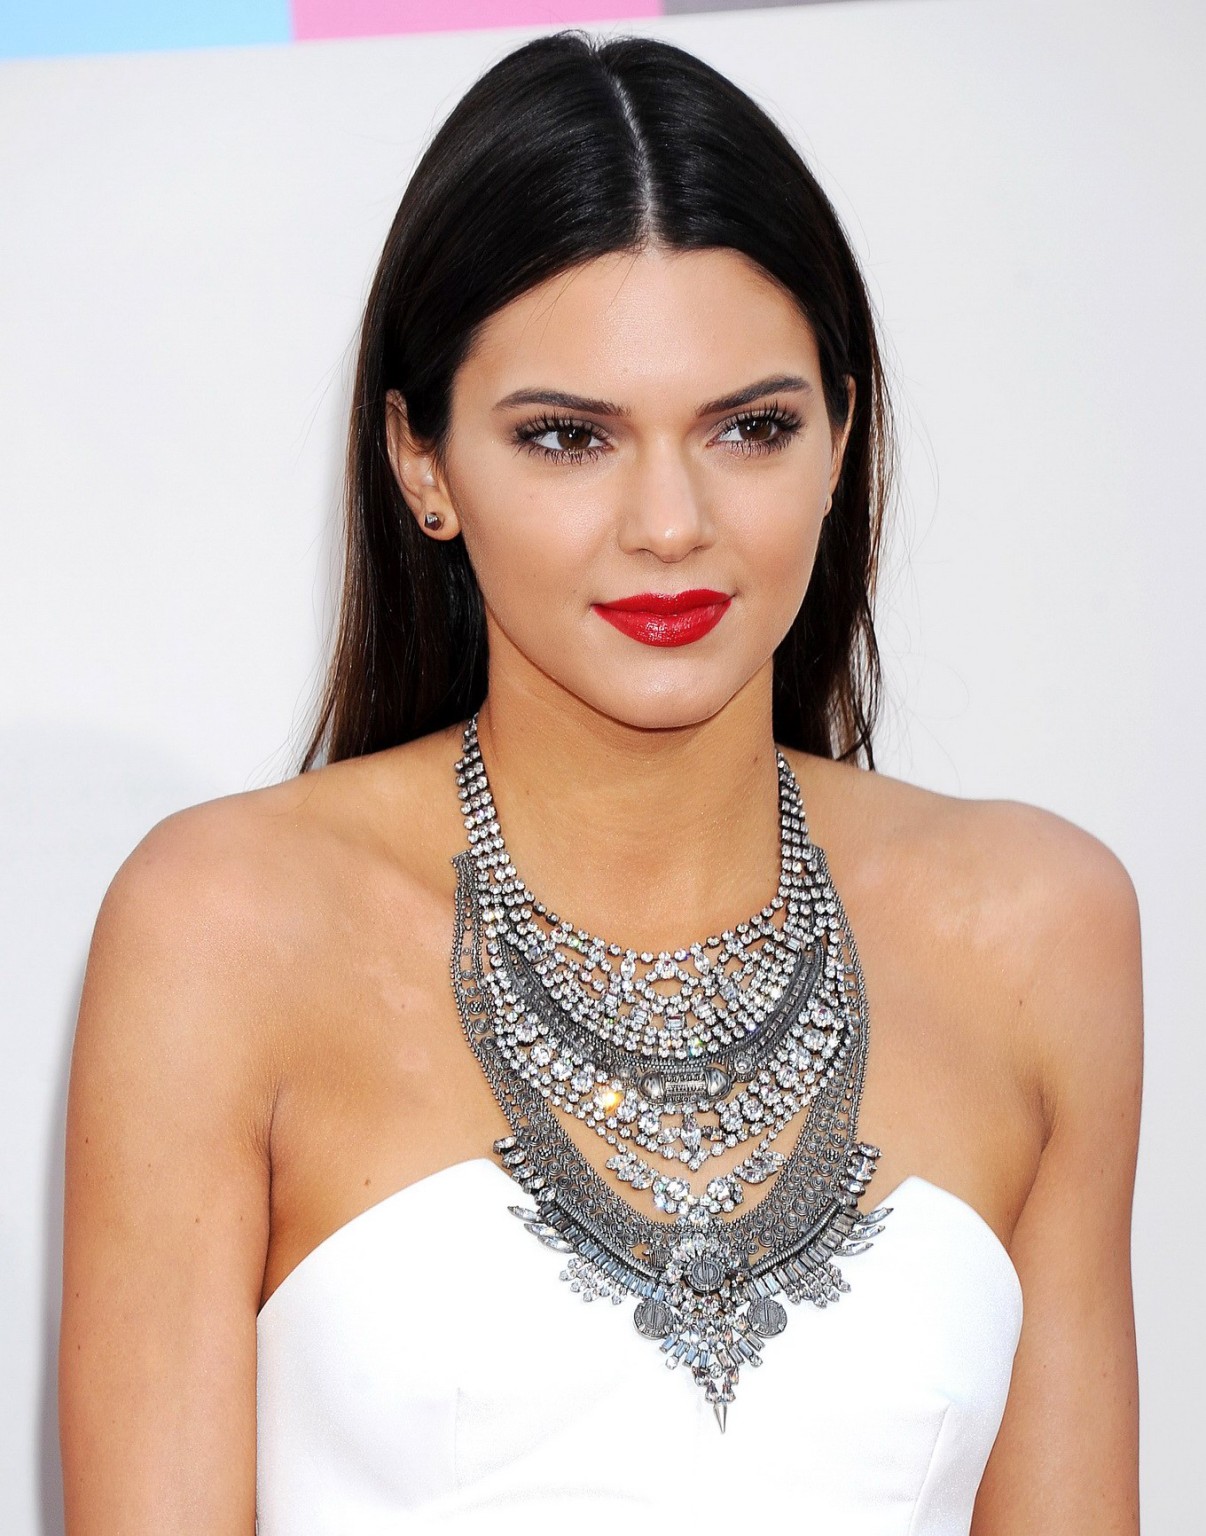 Kendall Jenner wearing tiny white mini dress at 2013 American Music Awards in Lo #75211948